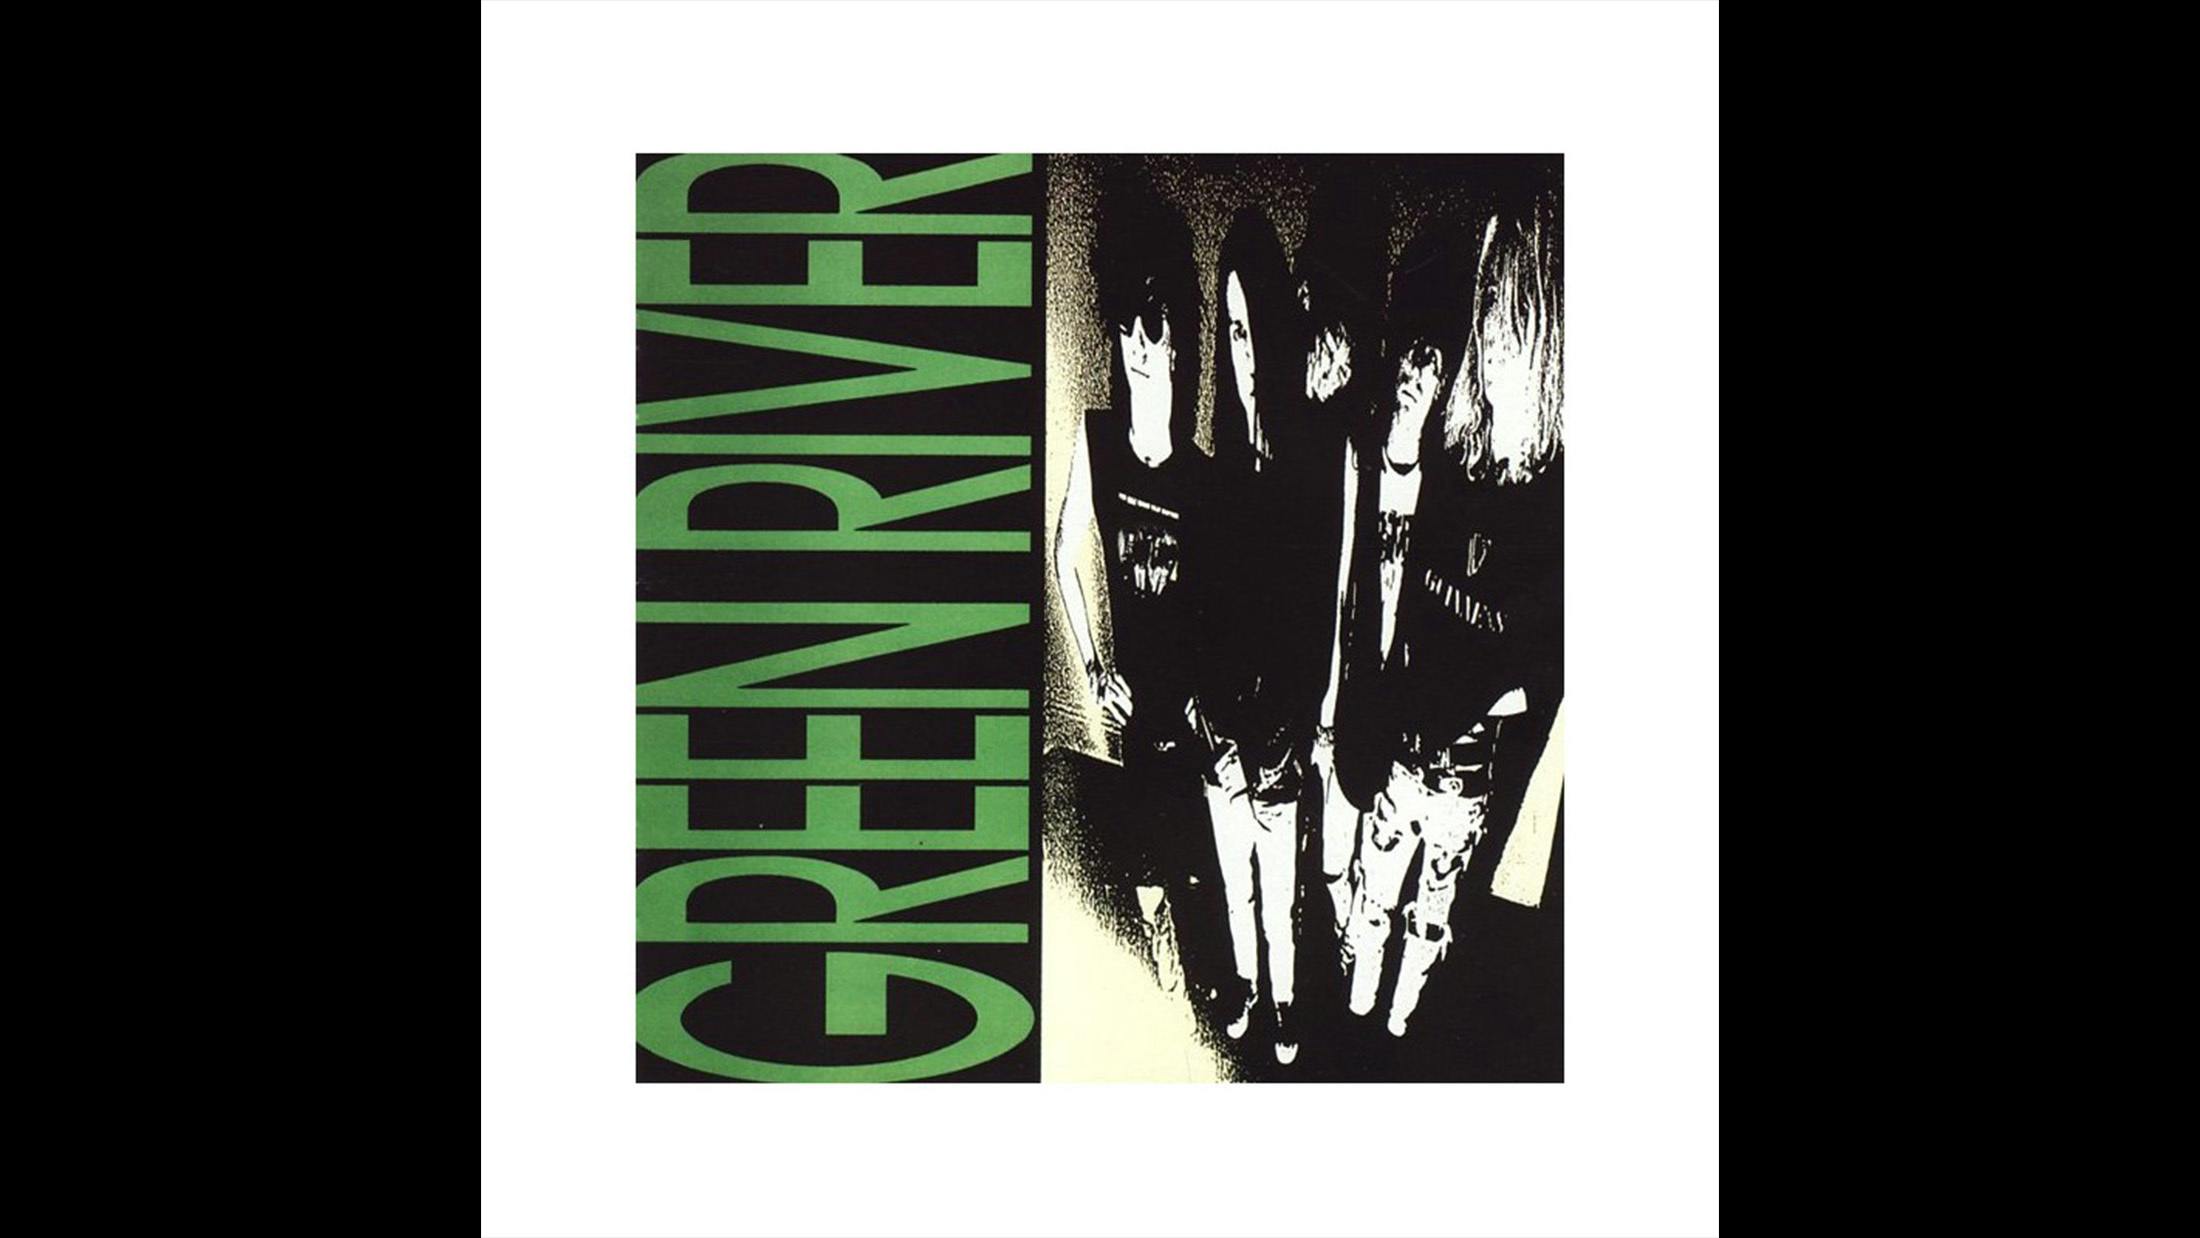 If one record truly signifies the birth of grunge it’s this ragged, five-track EP by Green River. The band’s post-Stooges snarl and ‘70s hard rock smarts are perfectly captured by producer Jack Endino. A few months after its release, internal tensions would tear the band apart midway through the recording of their debut album, Rehab Doll. Bassist Jeff Ament and guitarists Stone Gossard and Bruce Fairweather would give vent to their neo-glam ambitious in Mother Love Bone, while frontman Mark Arm continued to adhere to his punk principles by forming Mudhoney.